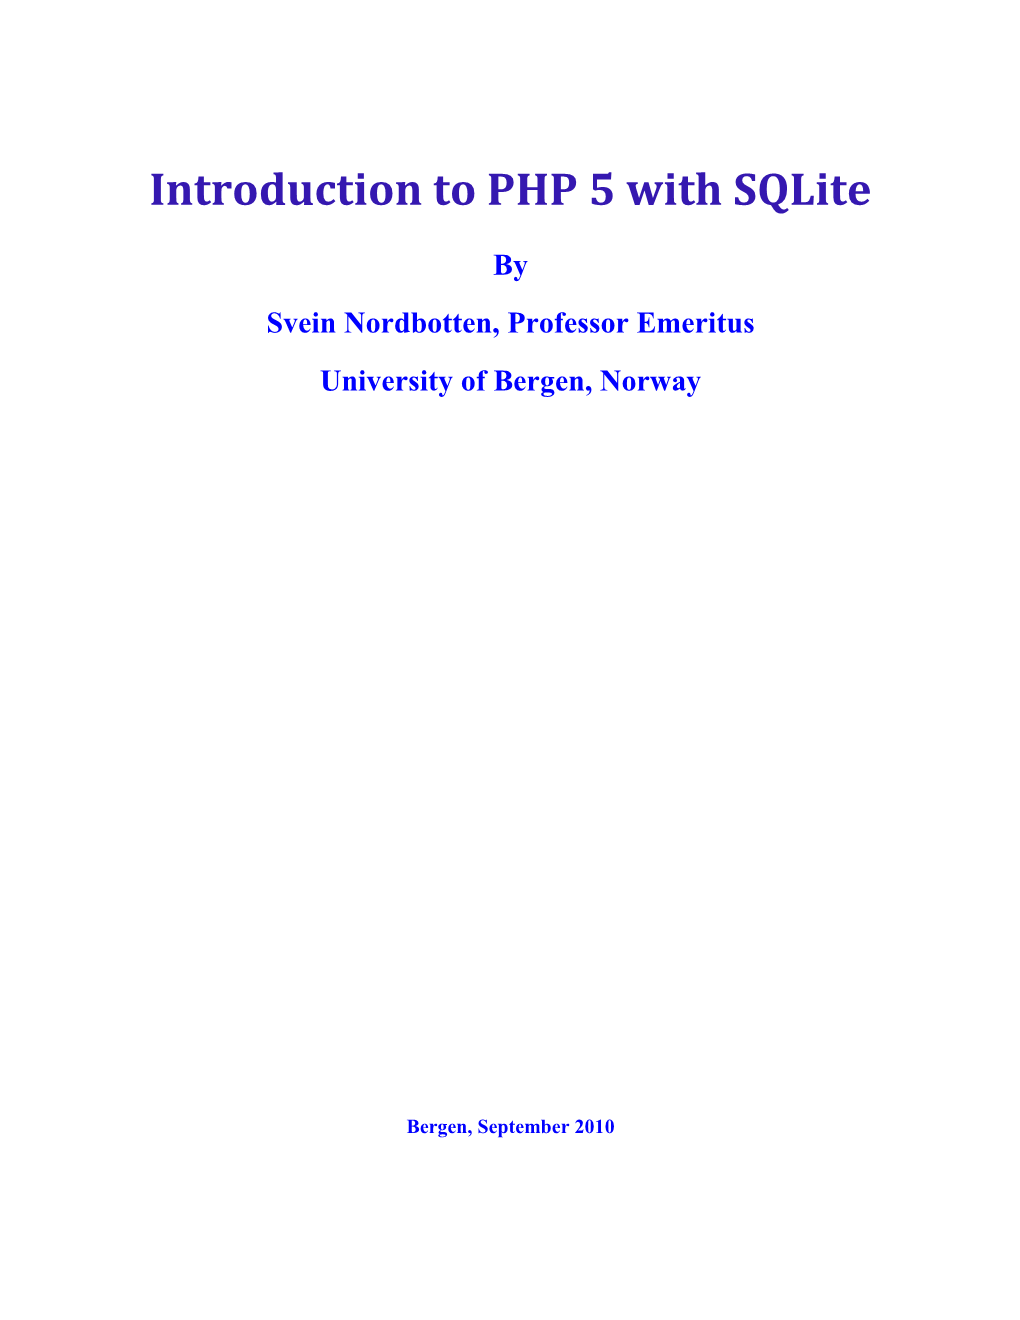 Introduction to PHP 5 with Sqlite